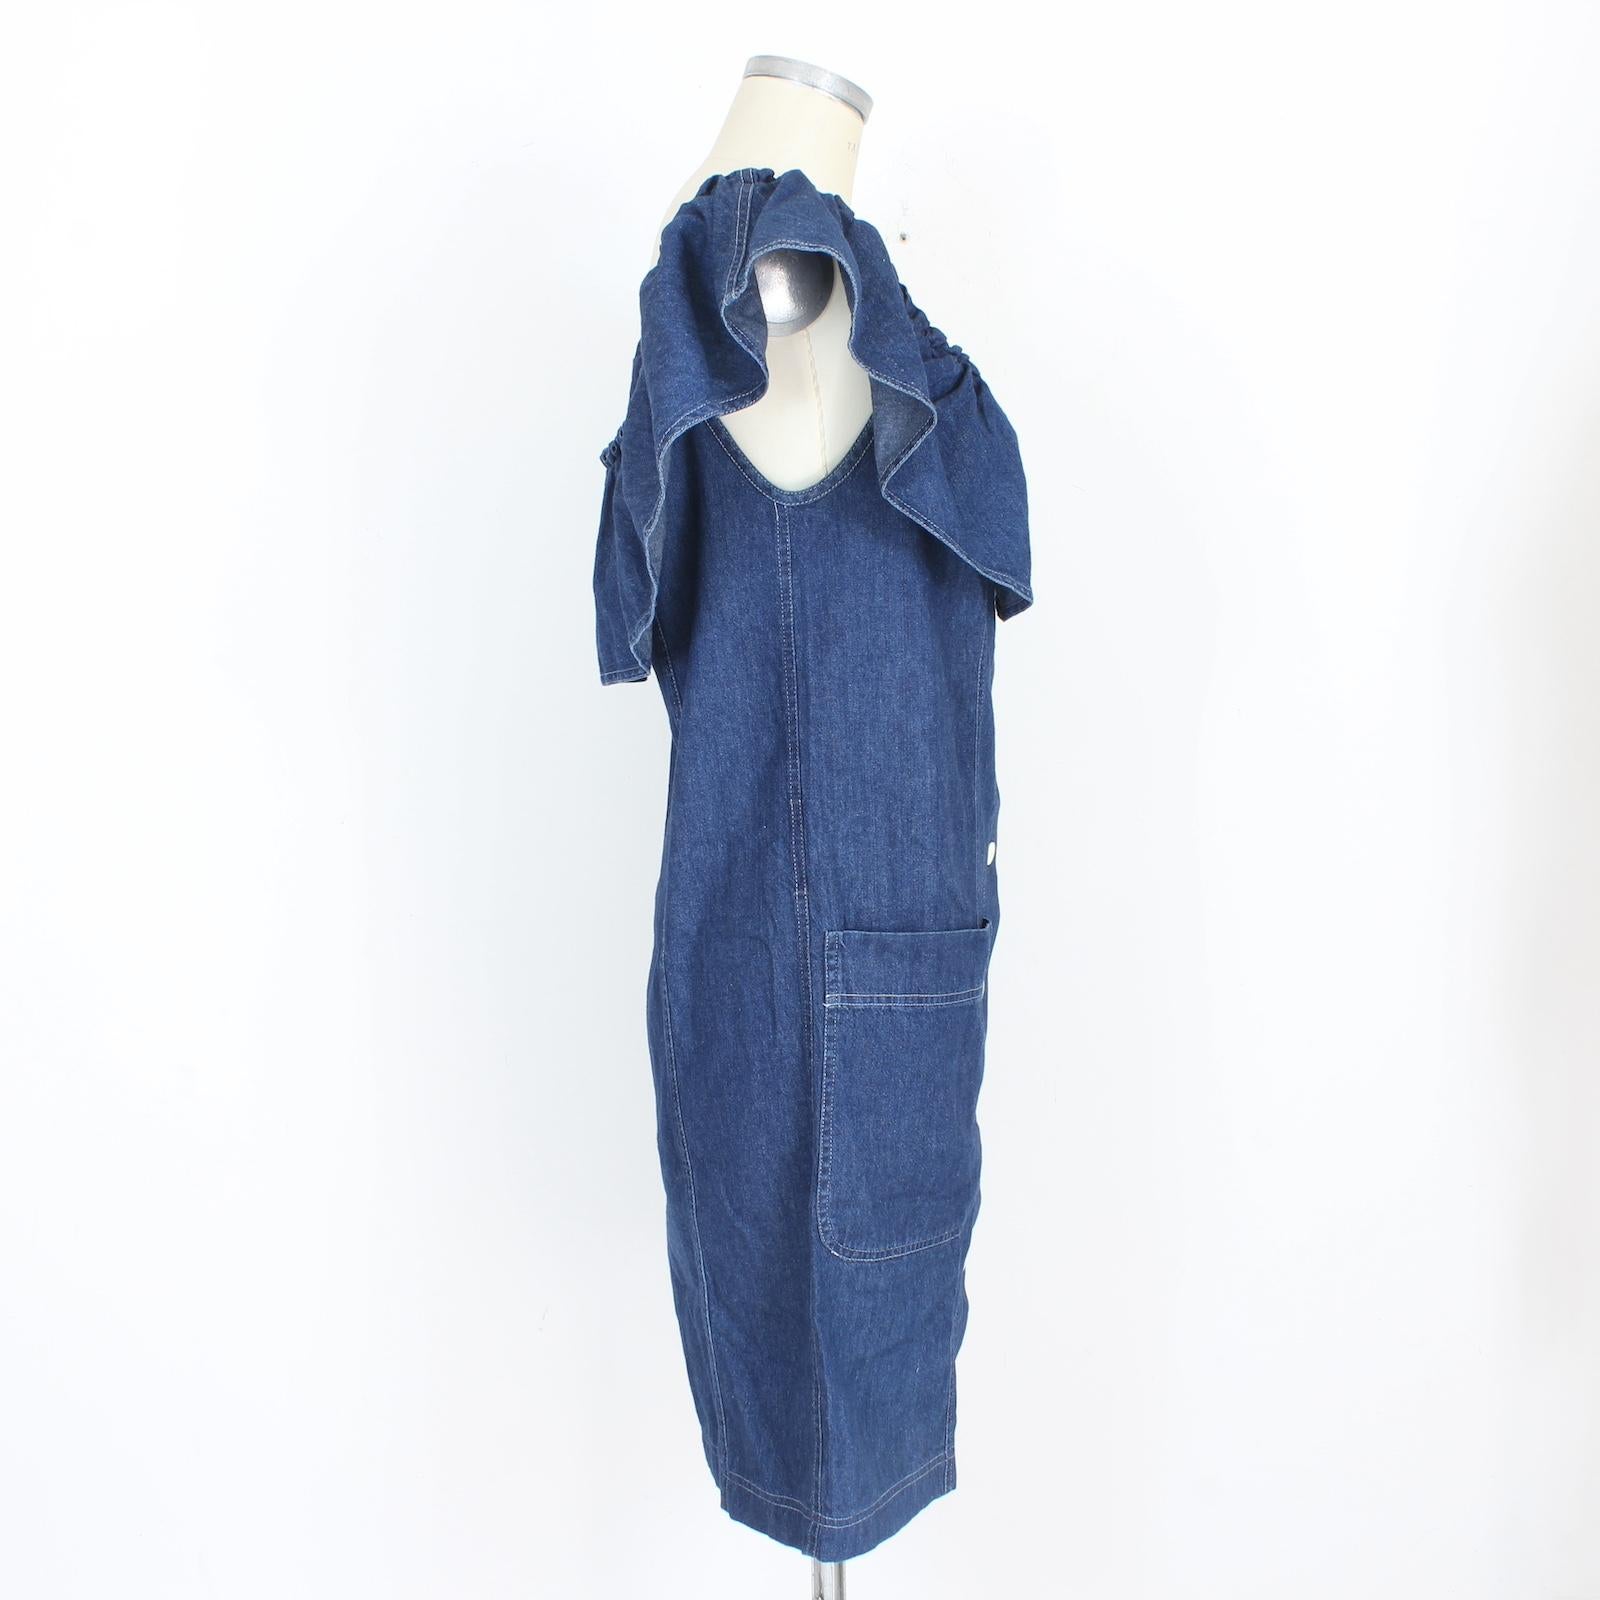 Moschino Blue Jeans Denim Rouches Dress 1980s In Excellent Condition For Sale In Brindisi, Bt